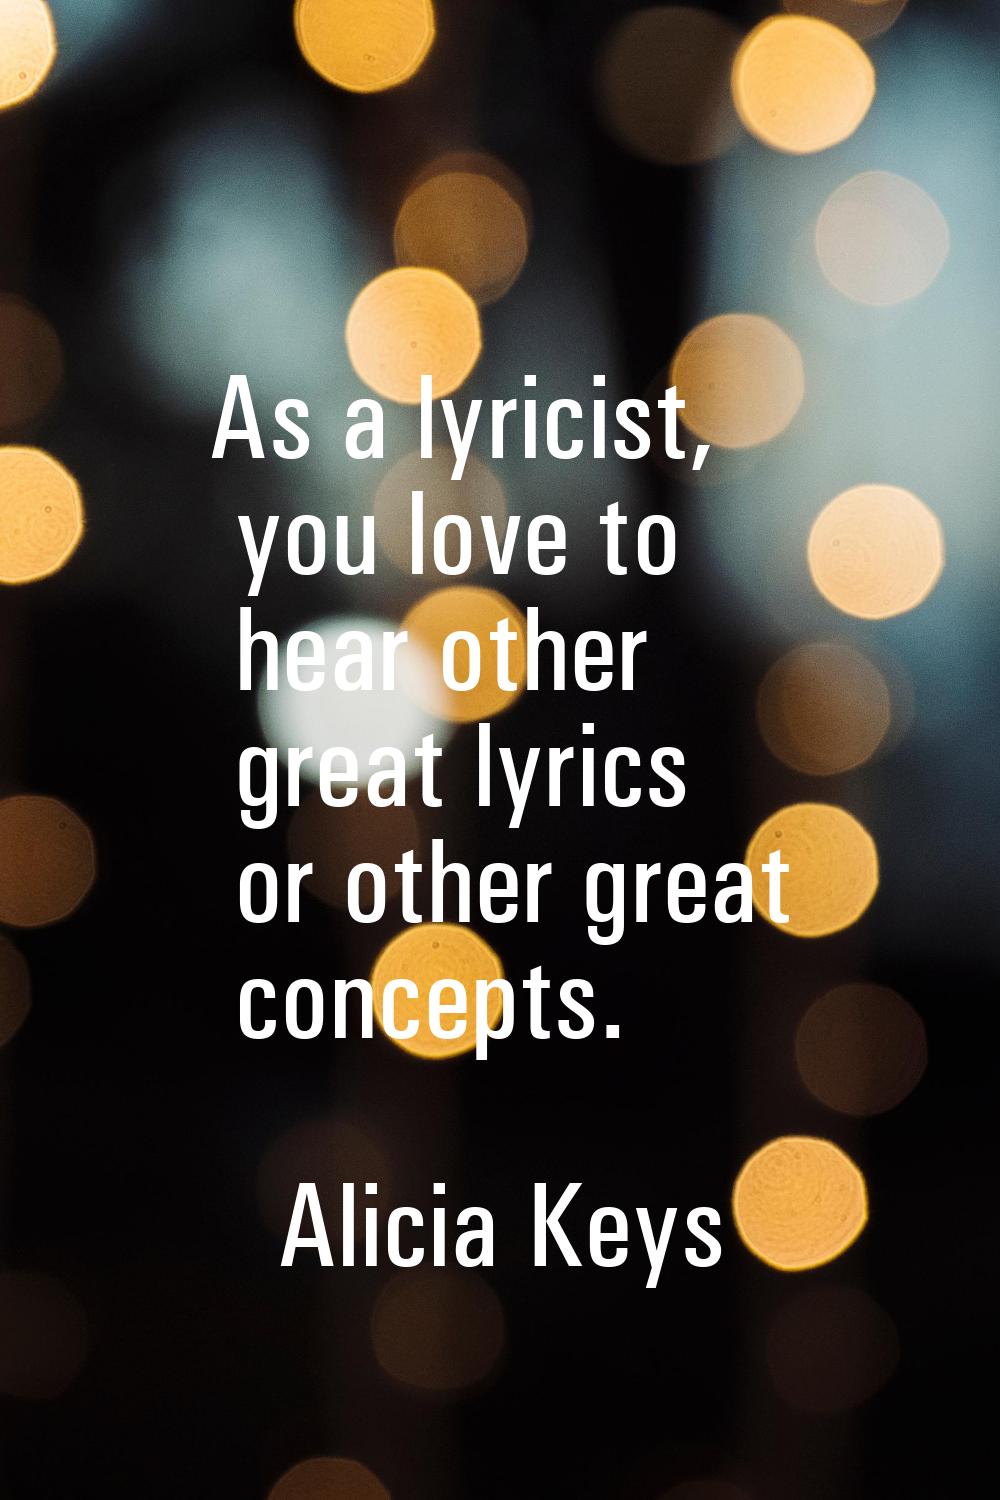 As a lyricist, you love to hear other great lyrics or other great concepts.